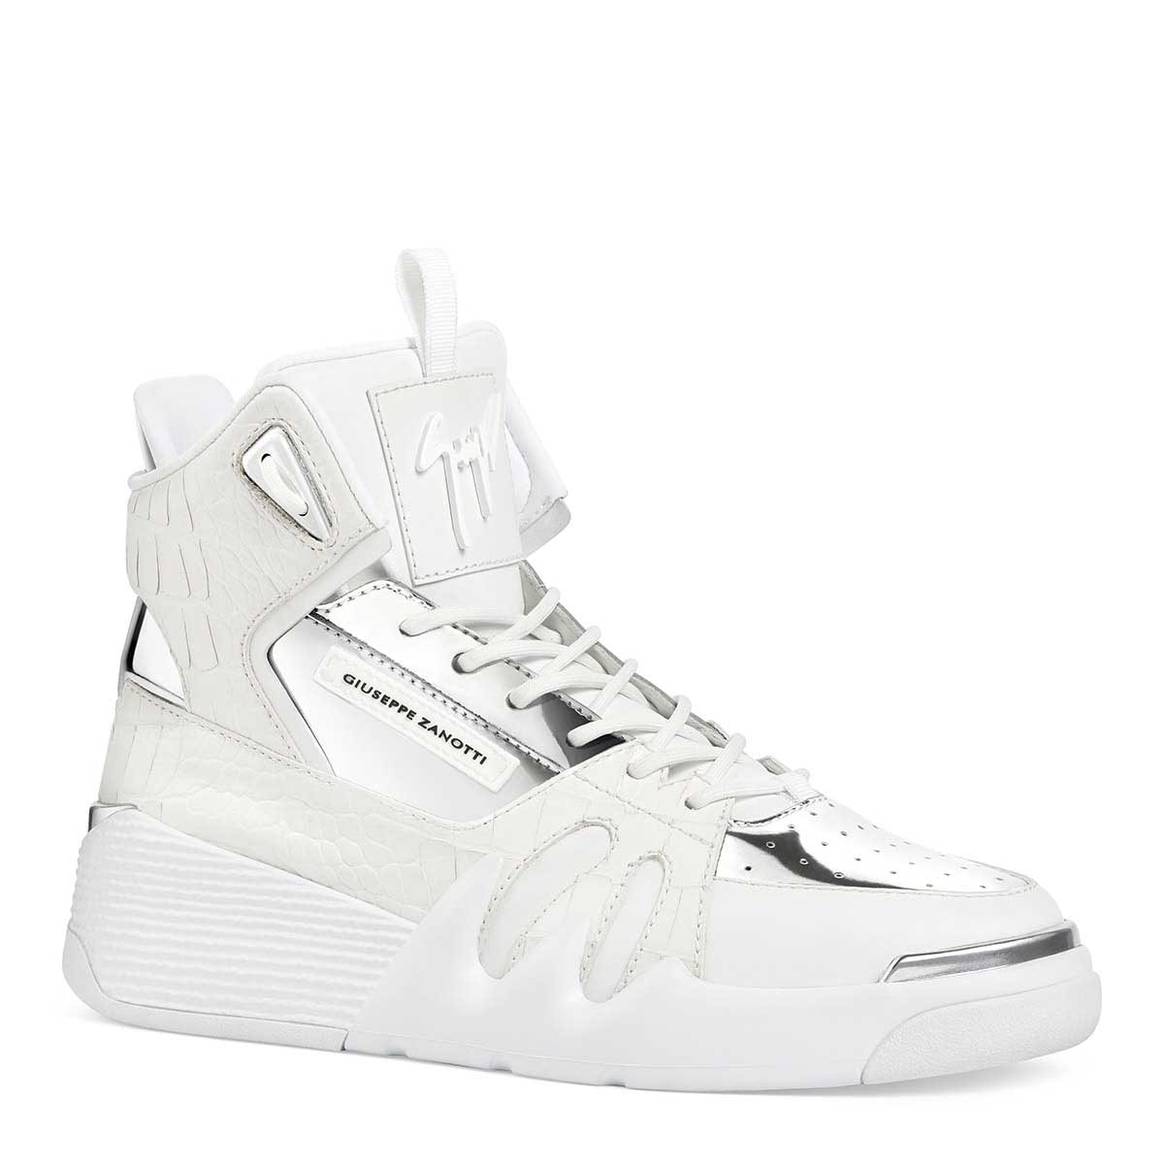 Giuseppe Zanotti launches trainer collection with exclusive style by Joshua Vides